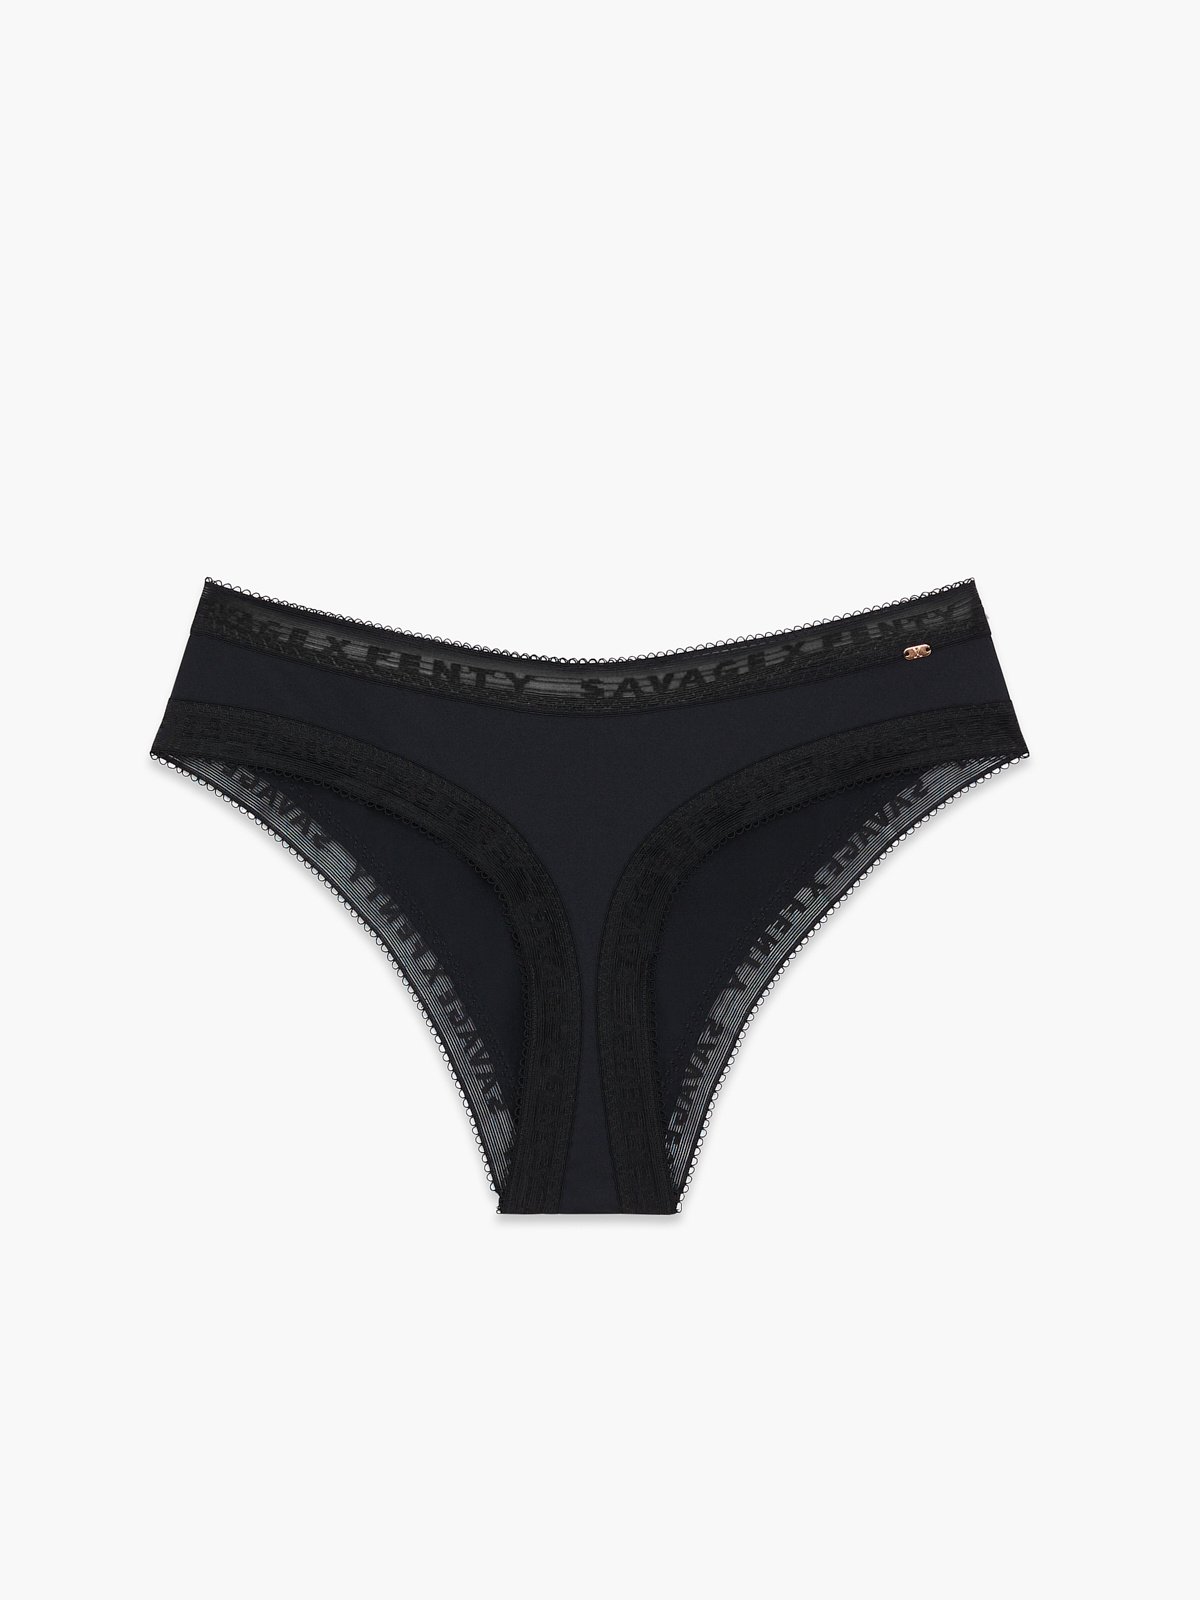 Microfiber and Lace Trim Cheeky Panty - Black